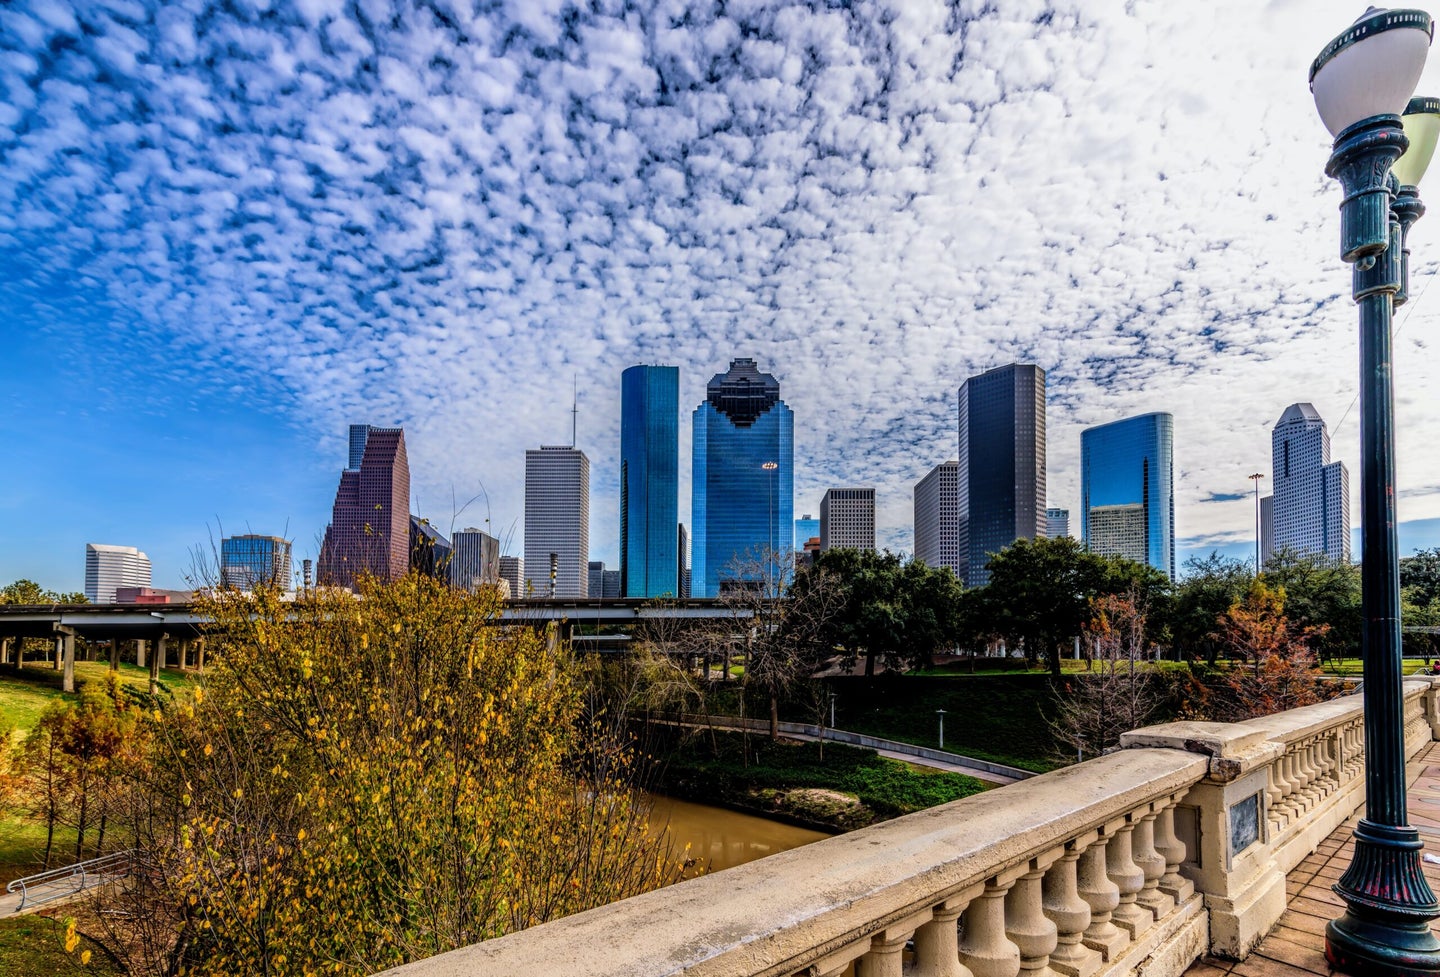 Houston, pictured here, is one of the cities aiming to be a hydrogen center. 